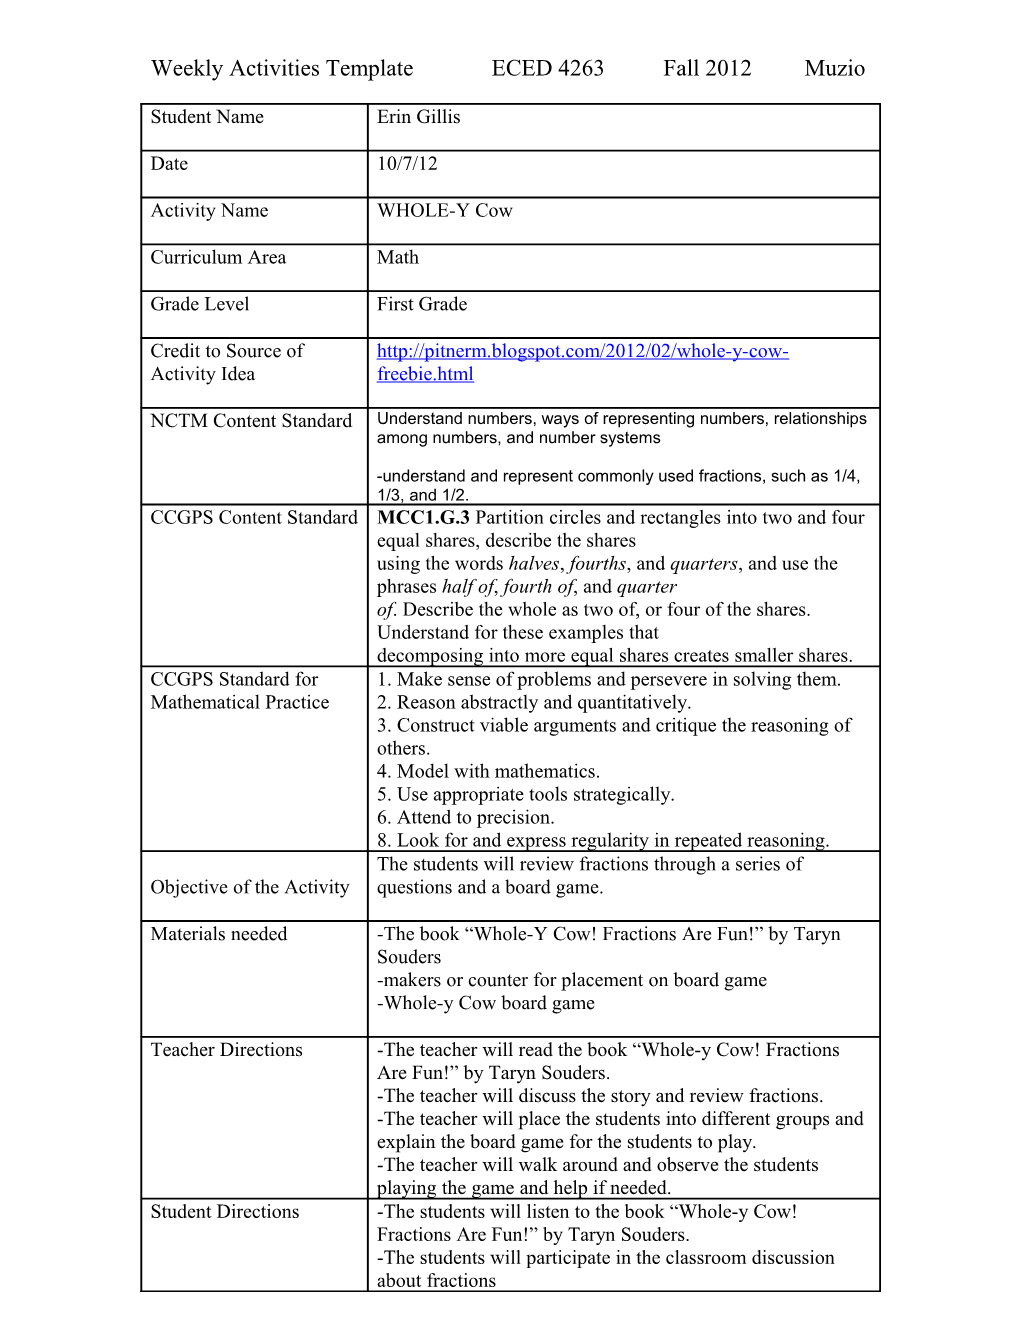 Weekly Curriculum Activity Template